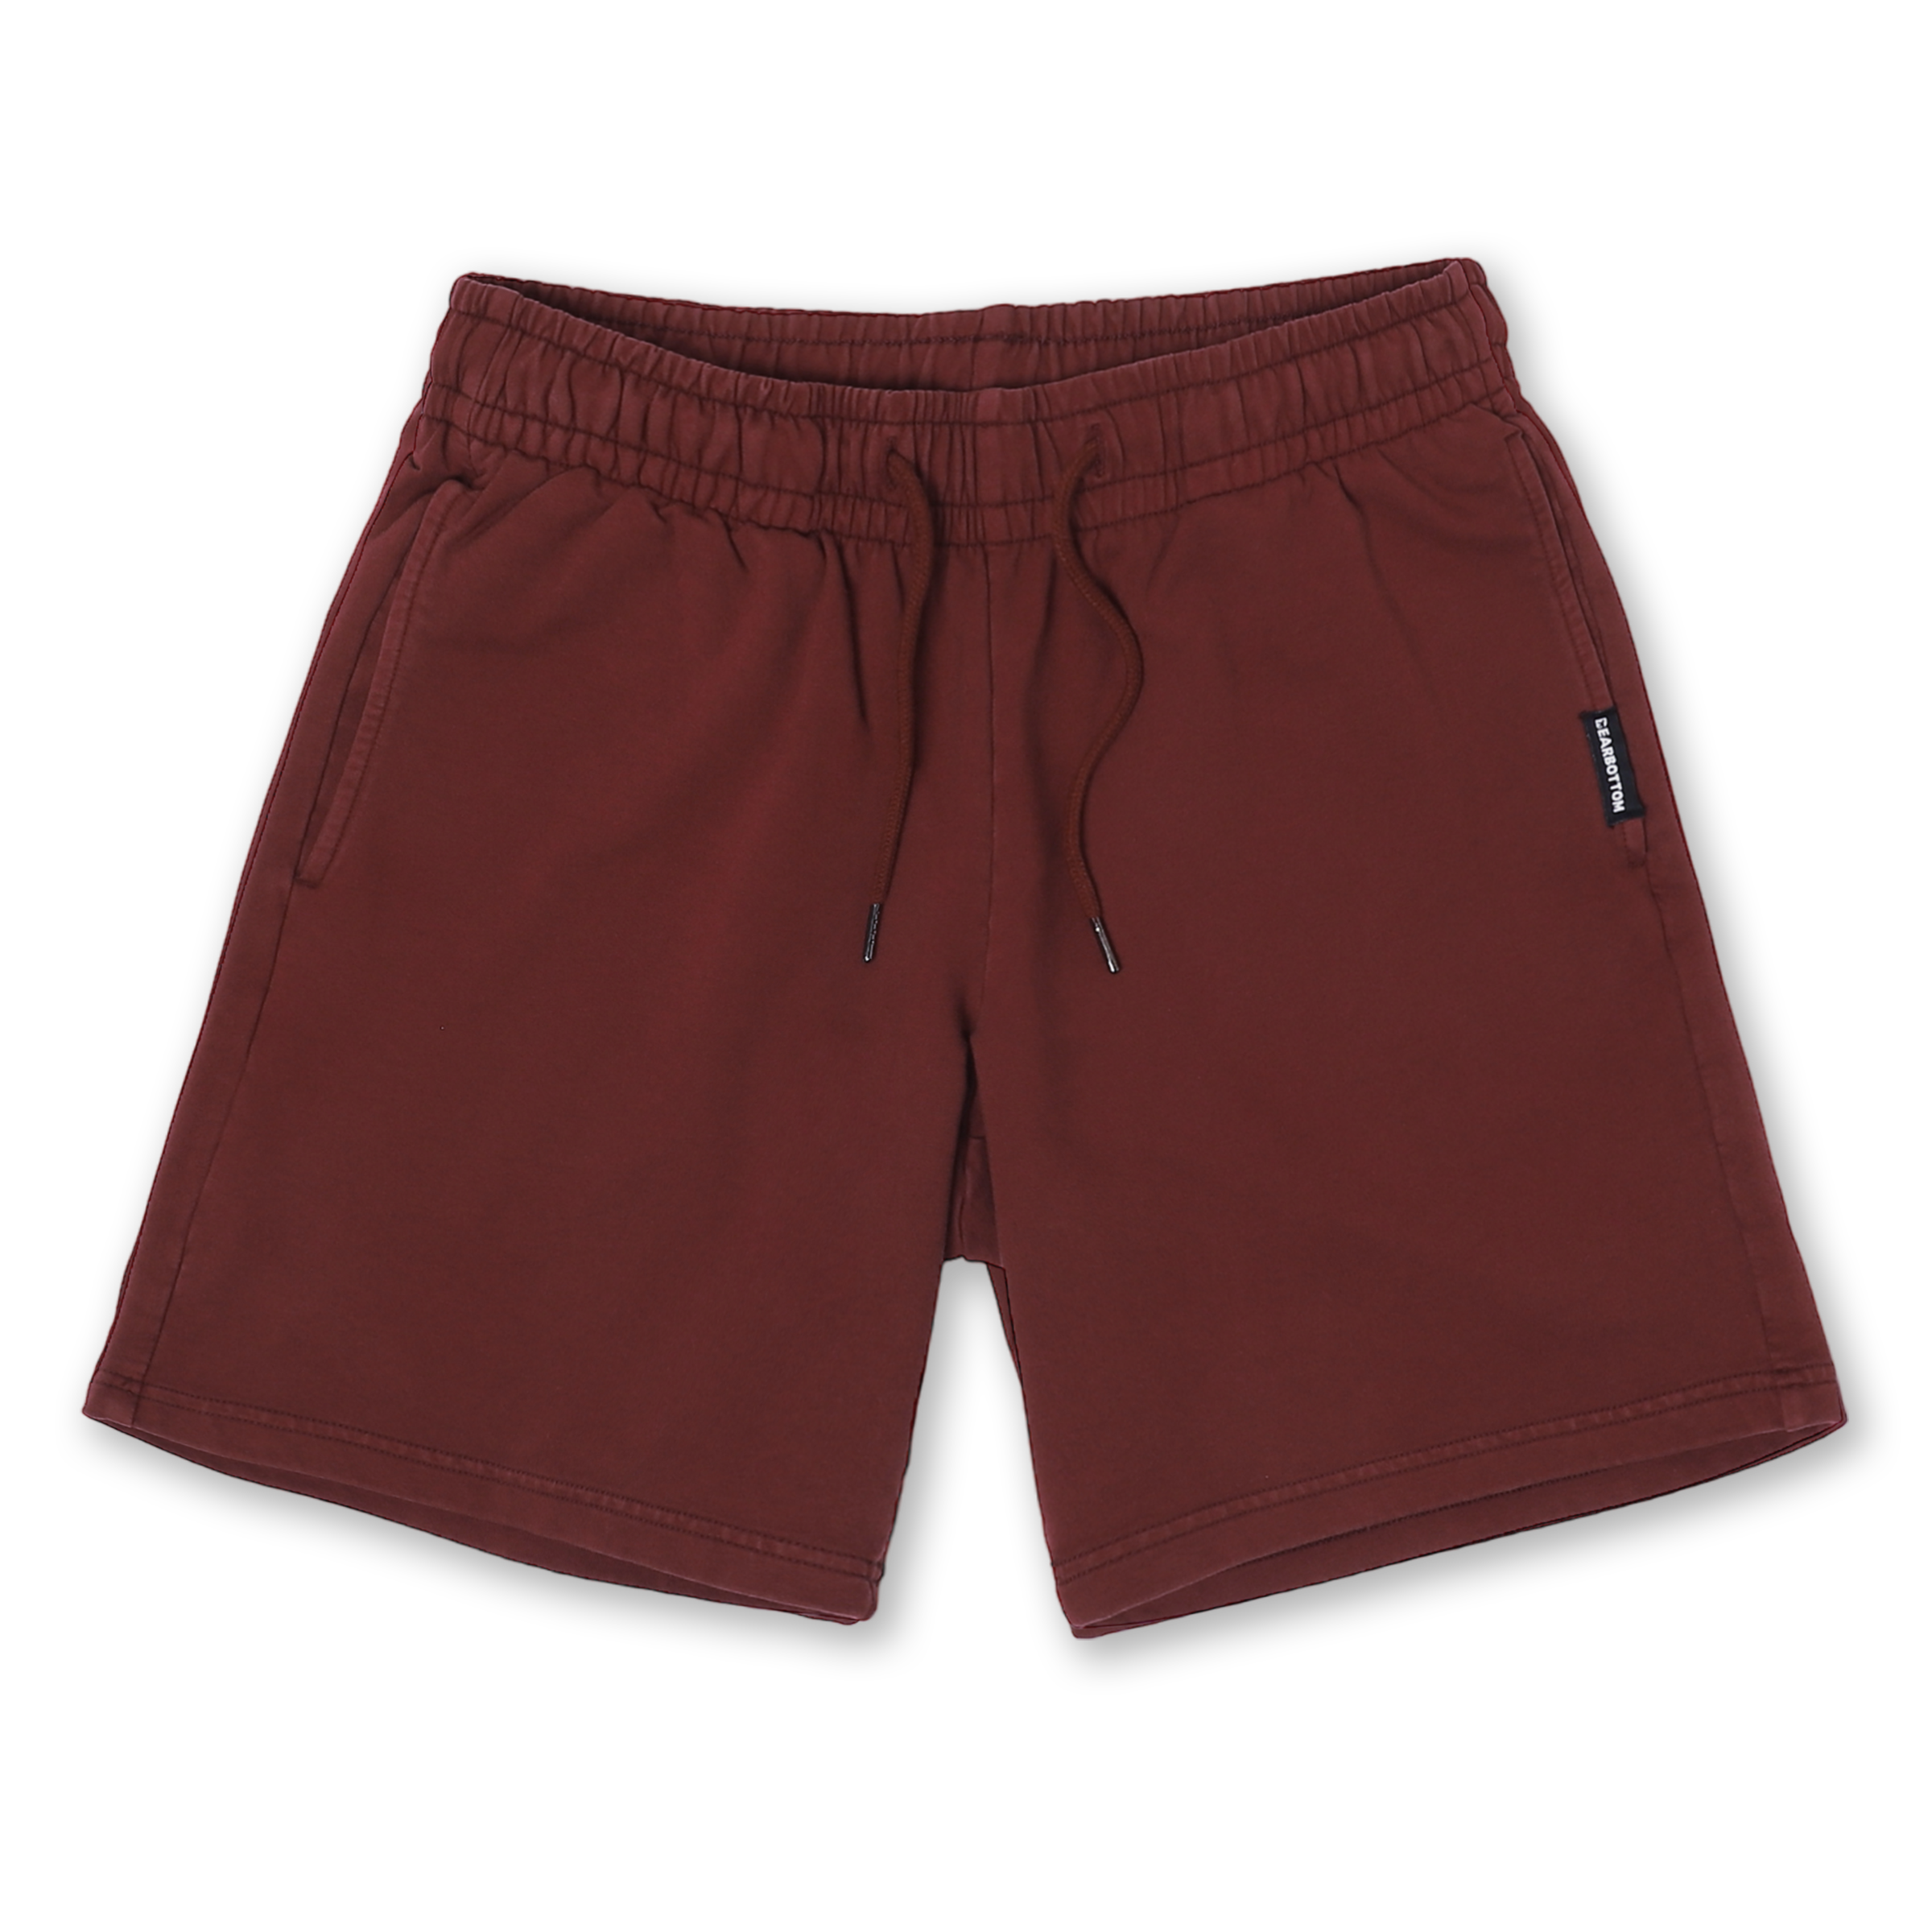 Loft Short 7" Maroon front with elastic waistband, fabric drawstring with metal tips, and two inseam pockets